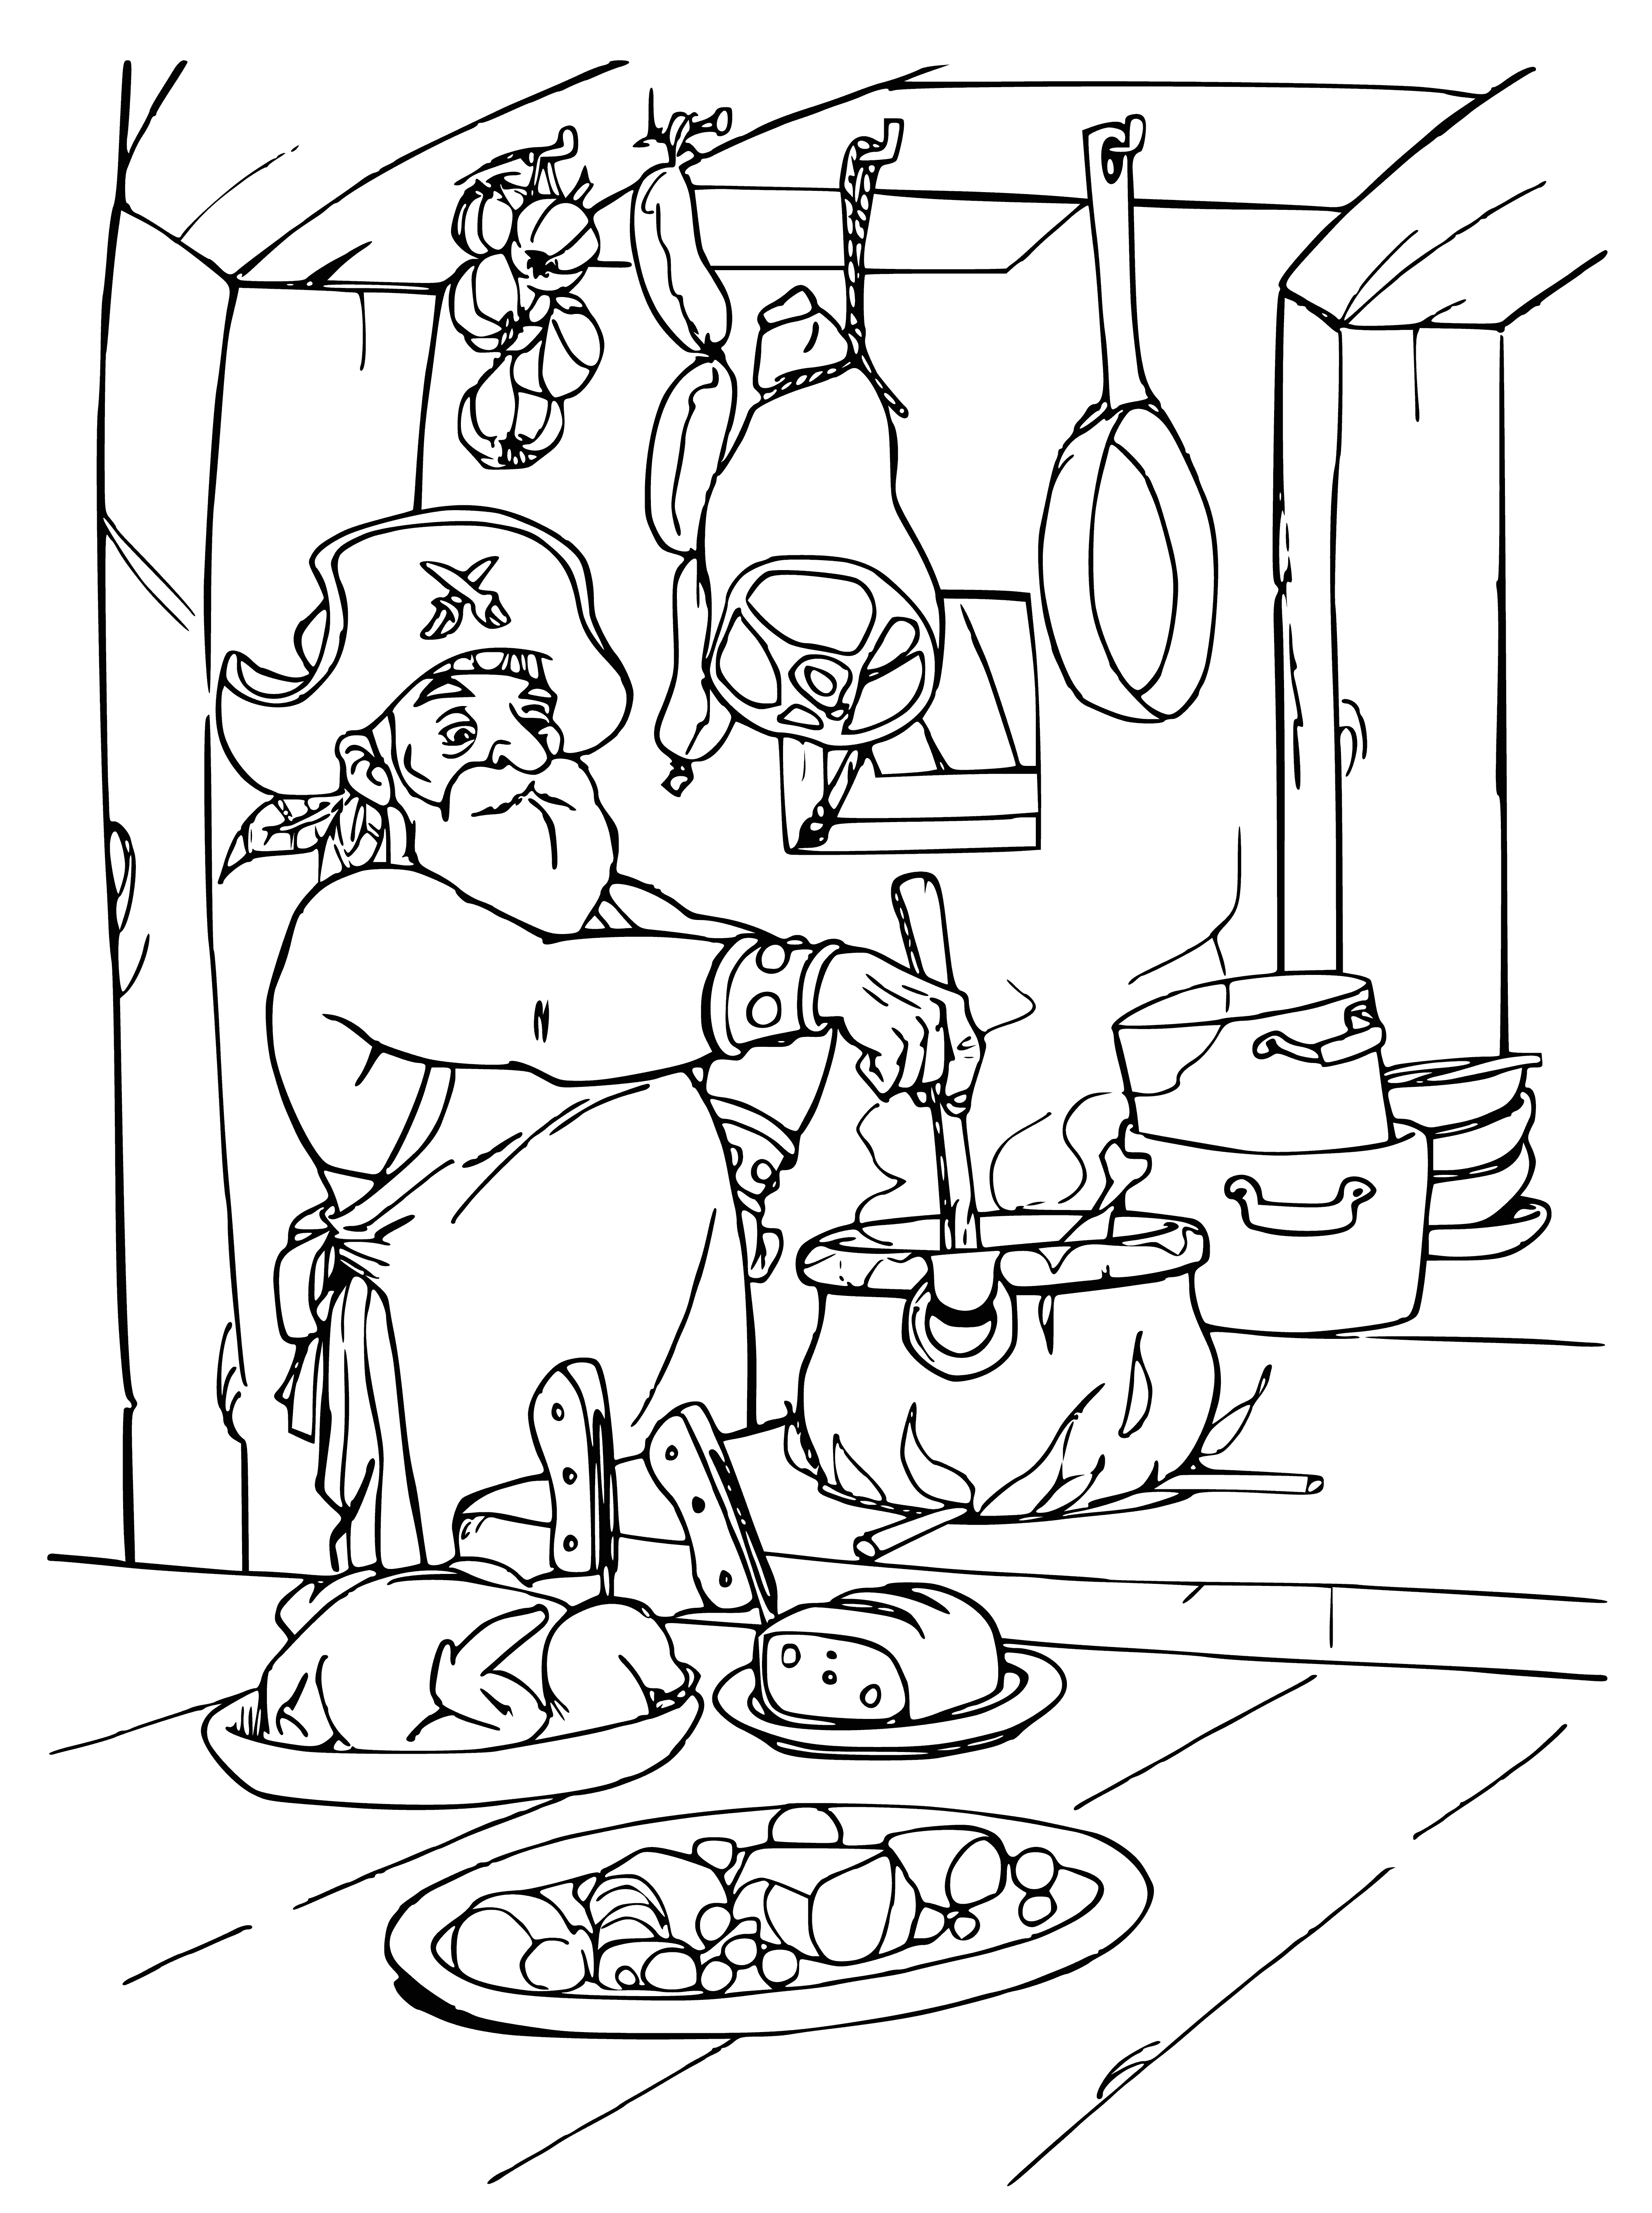 coloring page: Pirates gathered around cockfighting pit; betting on rooster with metal claws strapped to feet.